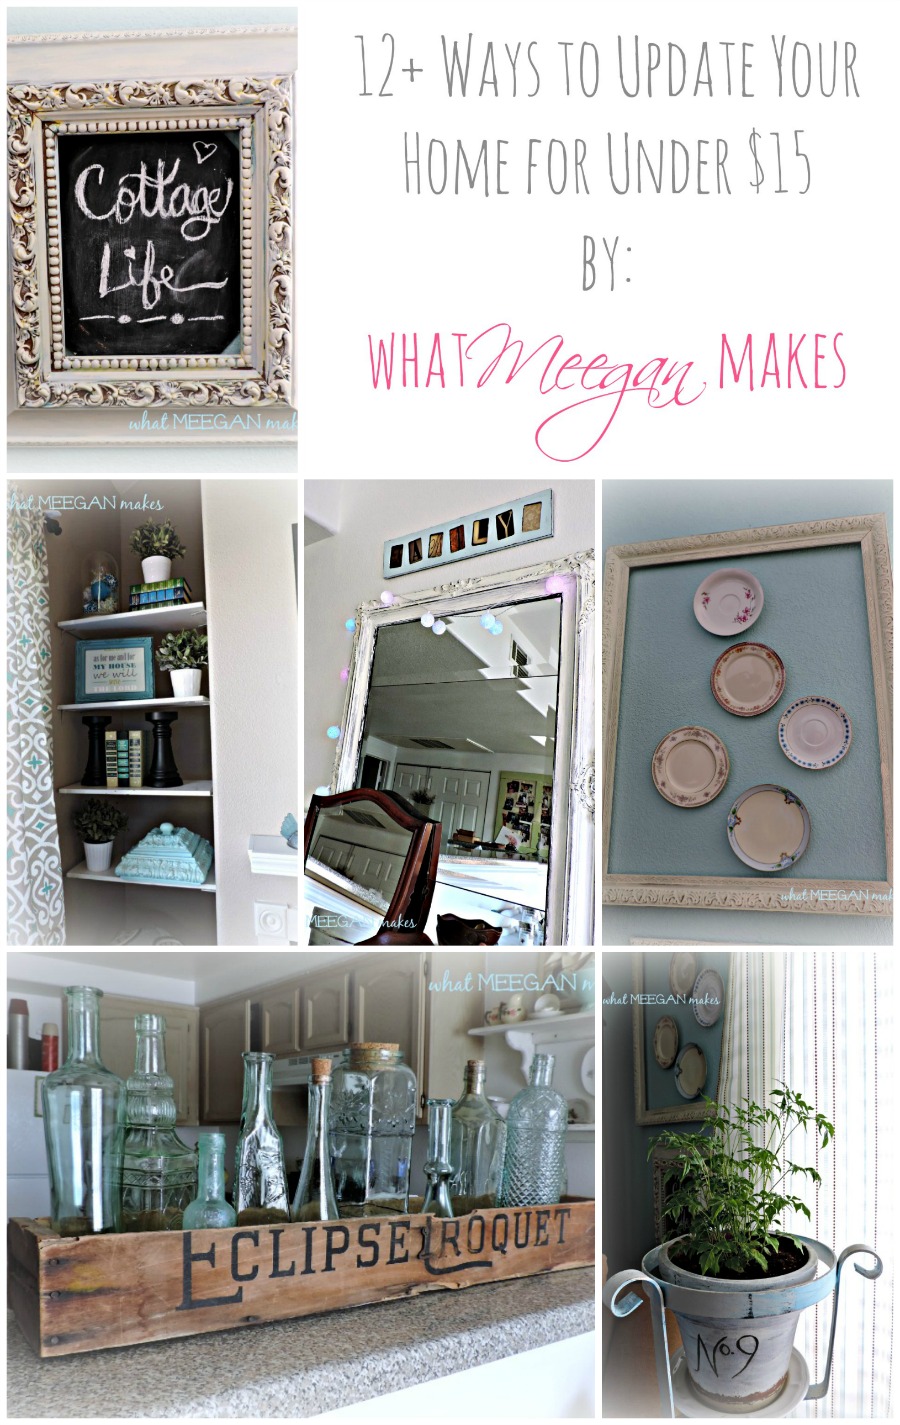 12+ Ways to Update Your Home for Under $15